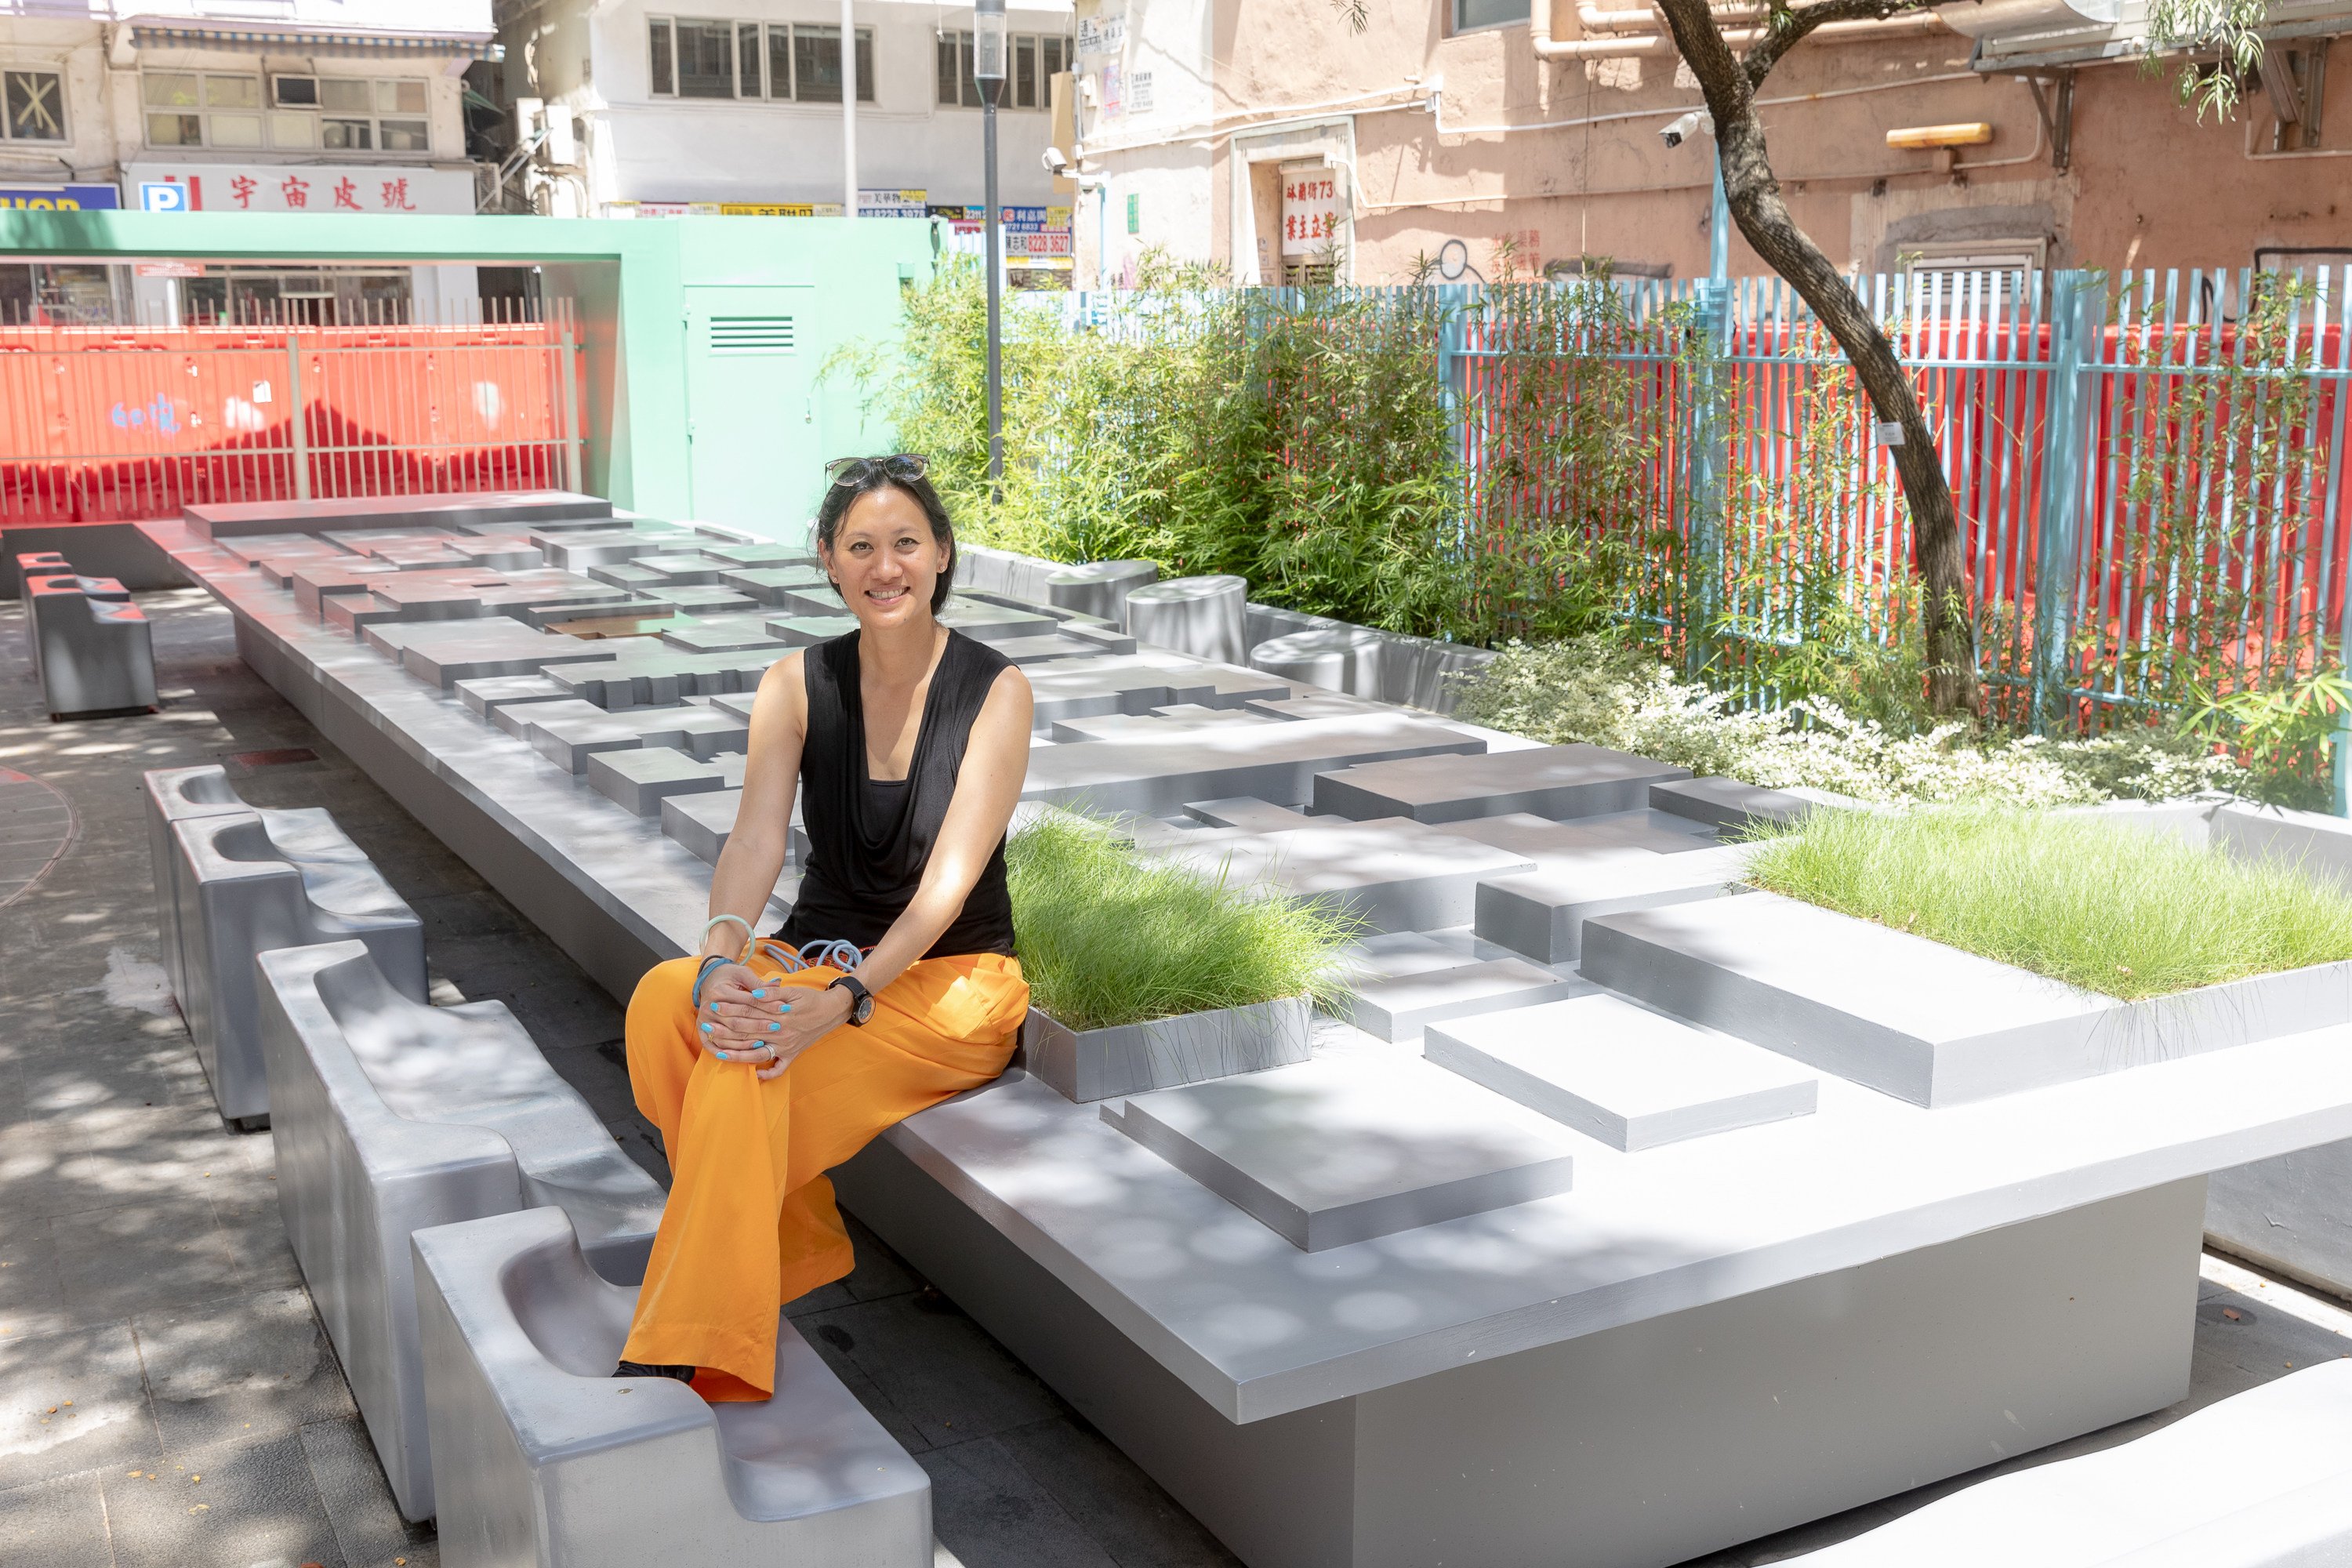 Marisa Yiu, Design Trust co-founder, at Hamilton Street Rest Garden, in Yau Tsim Mong in Hong Kong. Design Trust Futures Studio has dotted micro-parks across Hong Kong with one goal in mind: creating communities. Photo: Design Trust